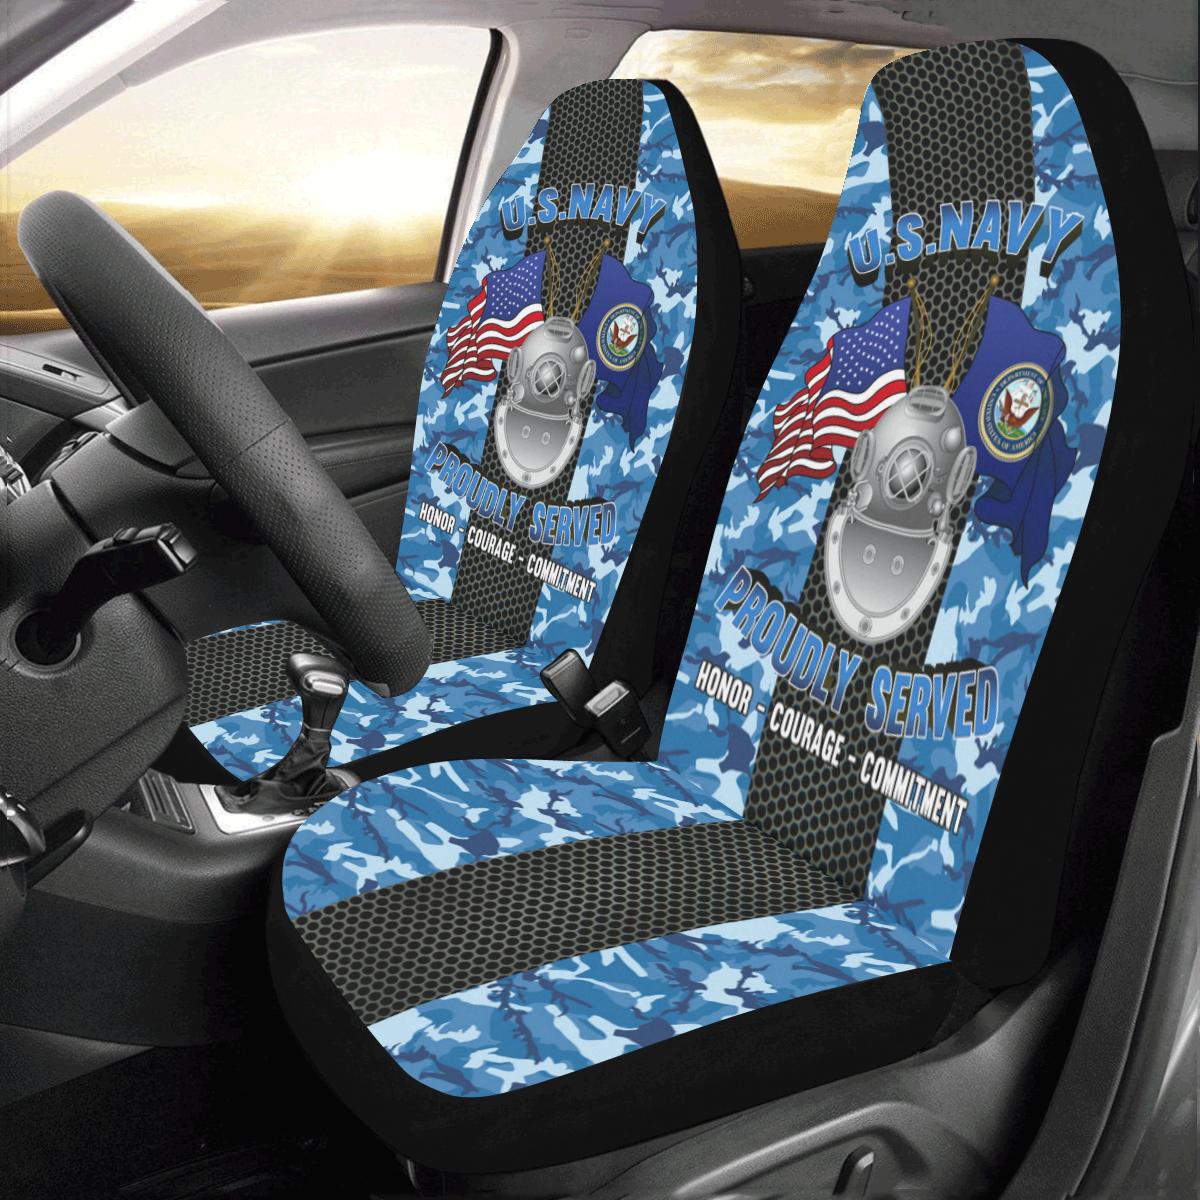 Navy Diver Navy ND Car Seat Covers (Set of 2)-SeatCovers-Navy-Rate-Veterans Nation